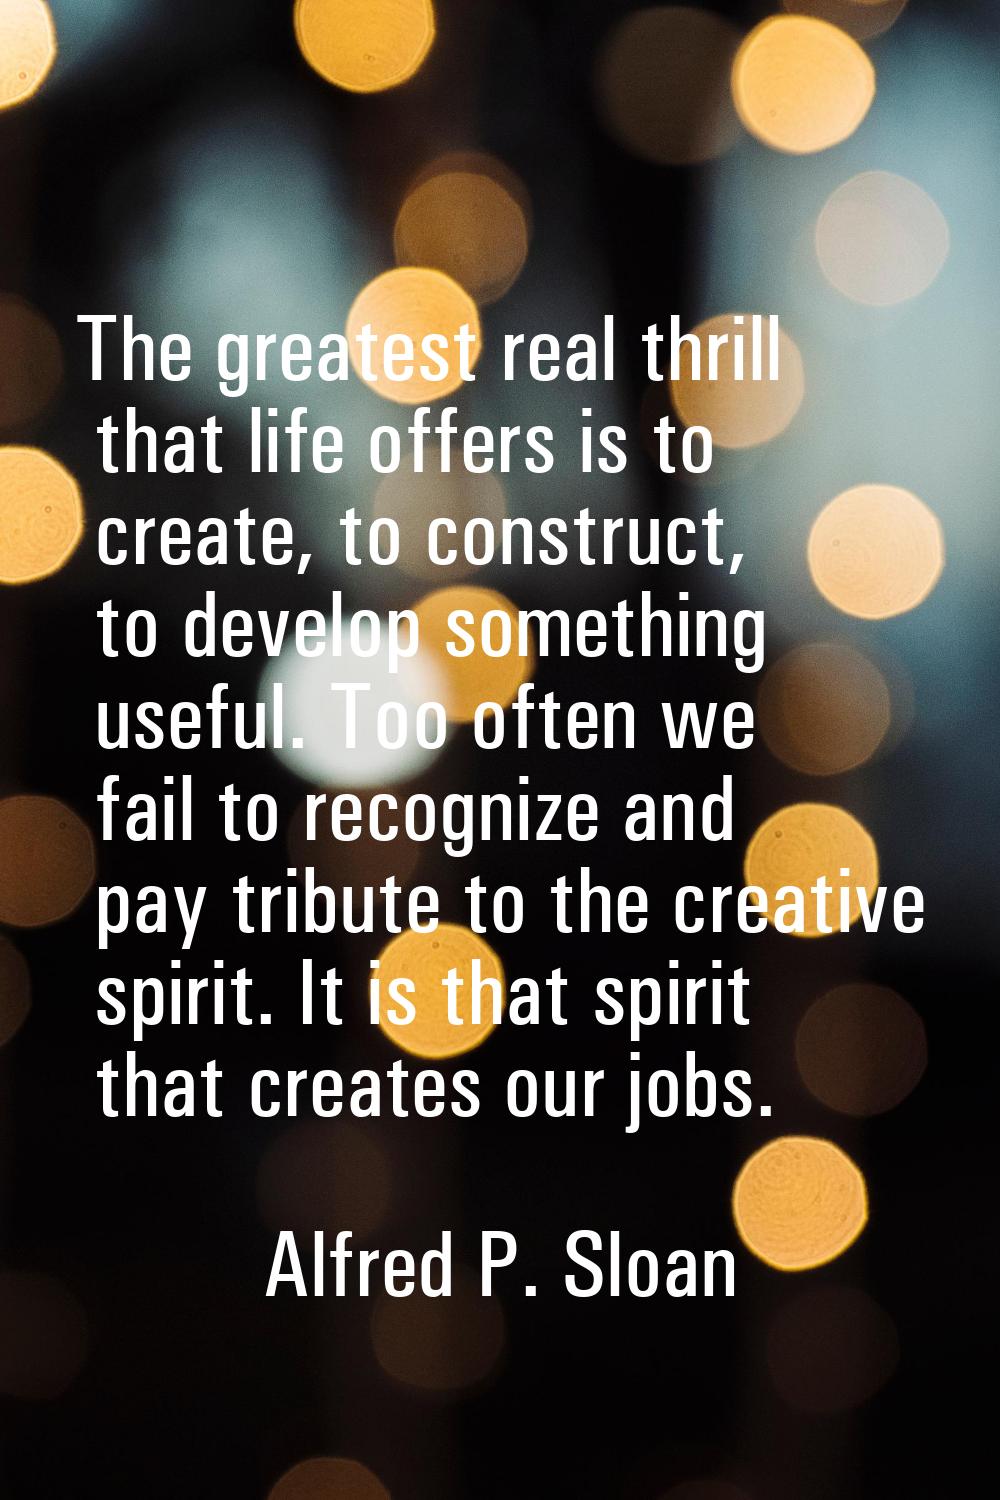 The greatest real thrill that life offers is to create, to construct, to develop something useful. 